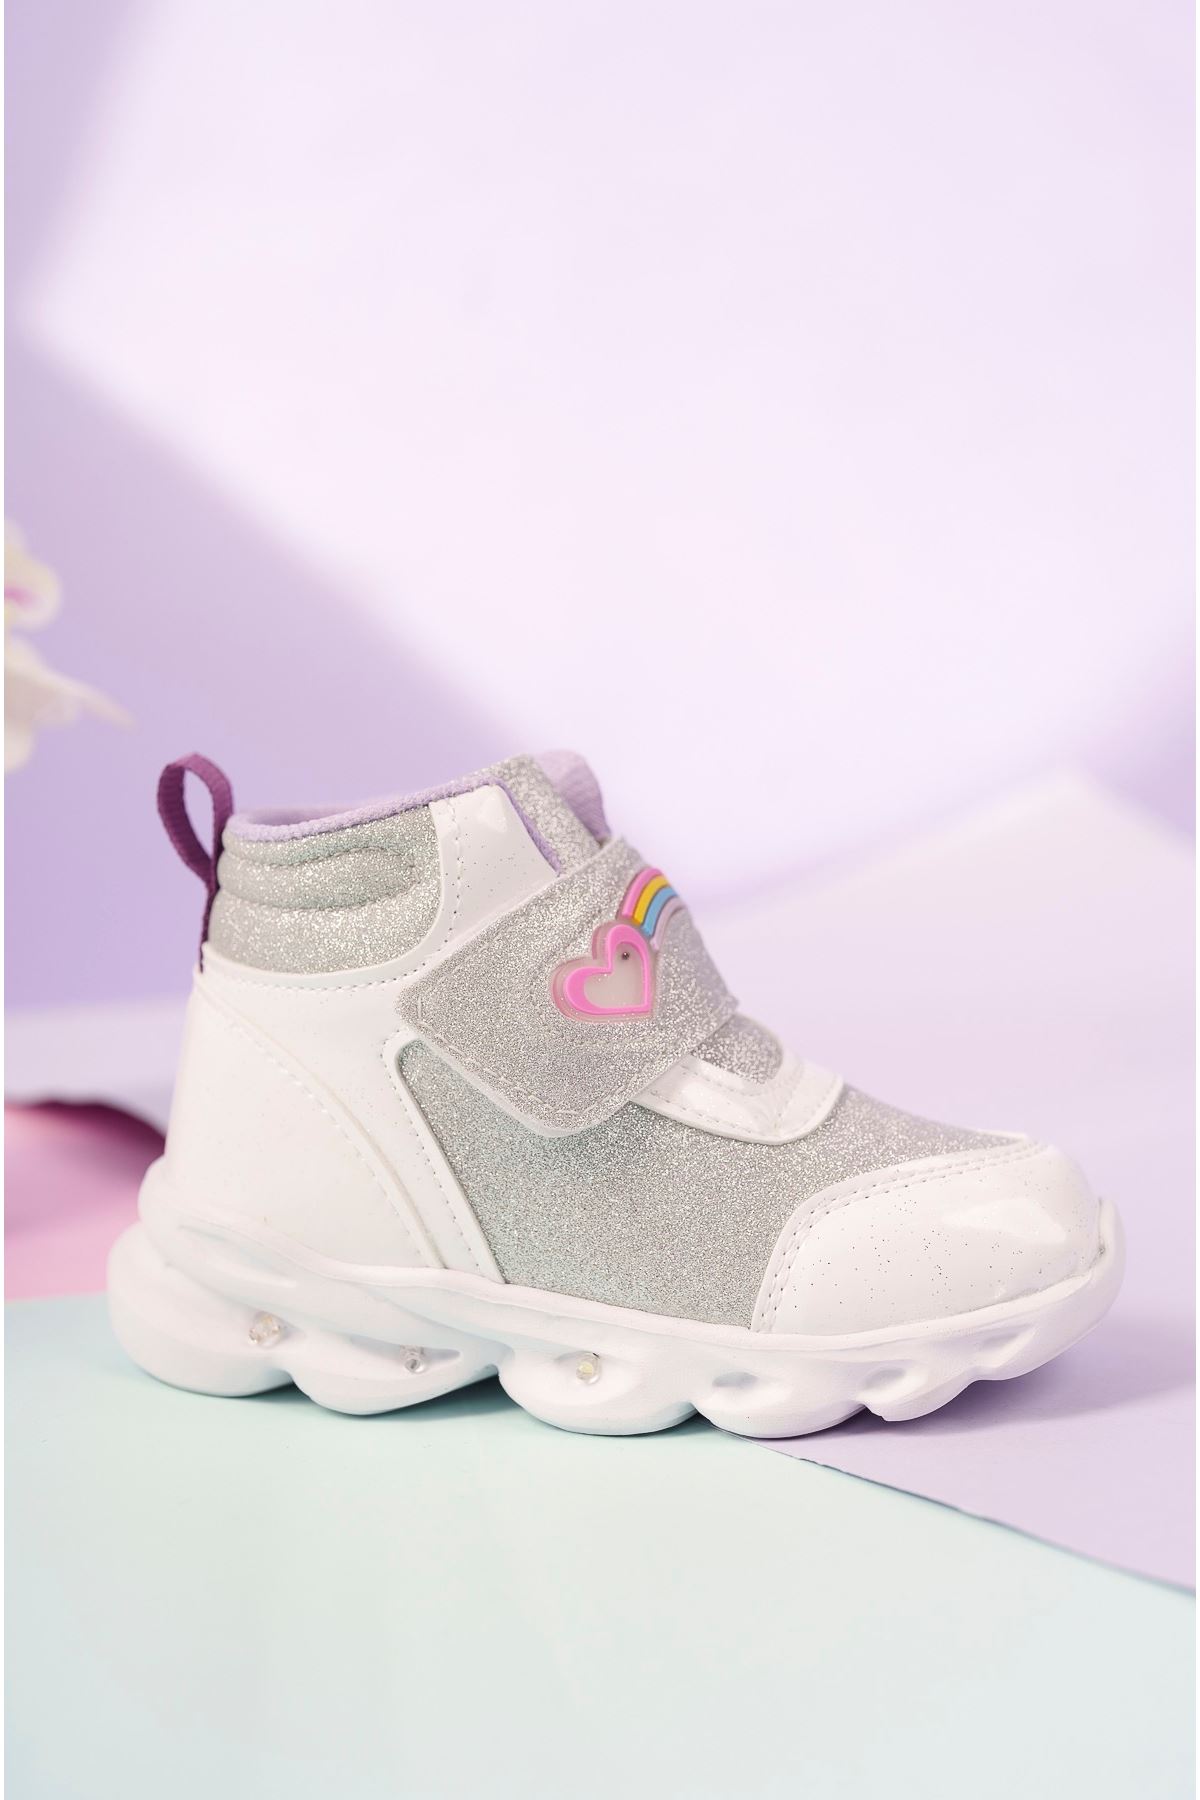 Luminous Silver Silvery White Baby Sport Boots